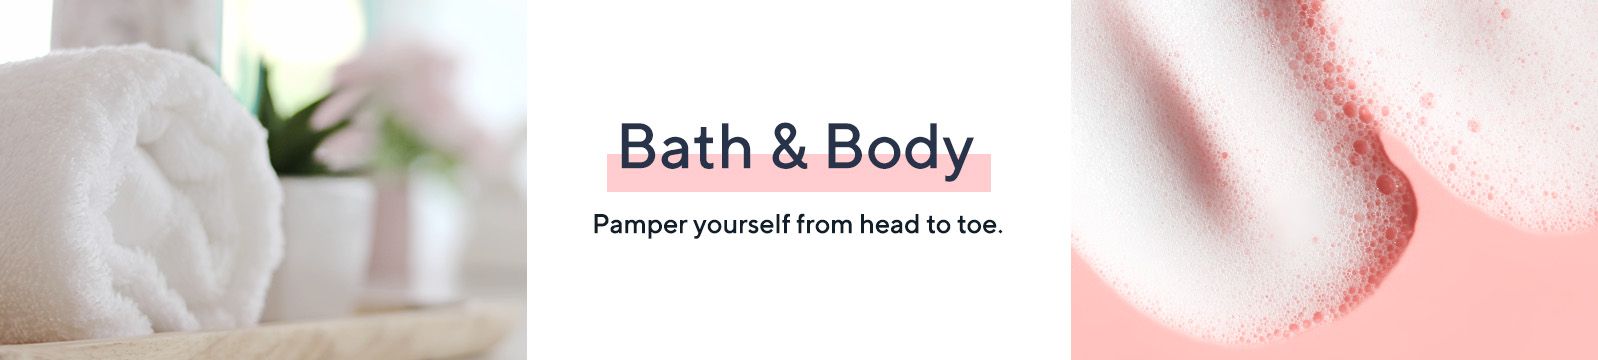 Bath And Body — Beauty Page 2 